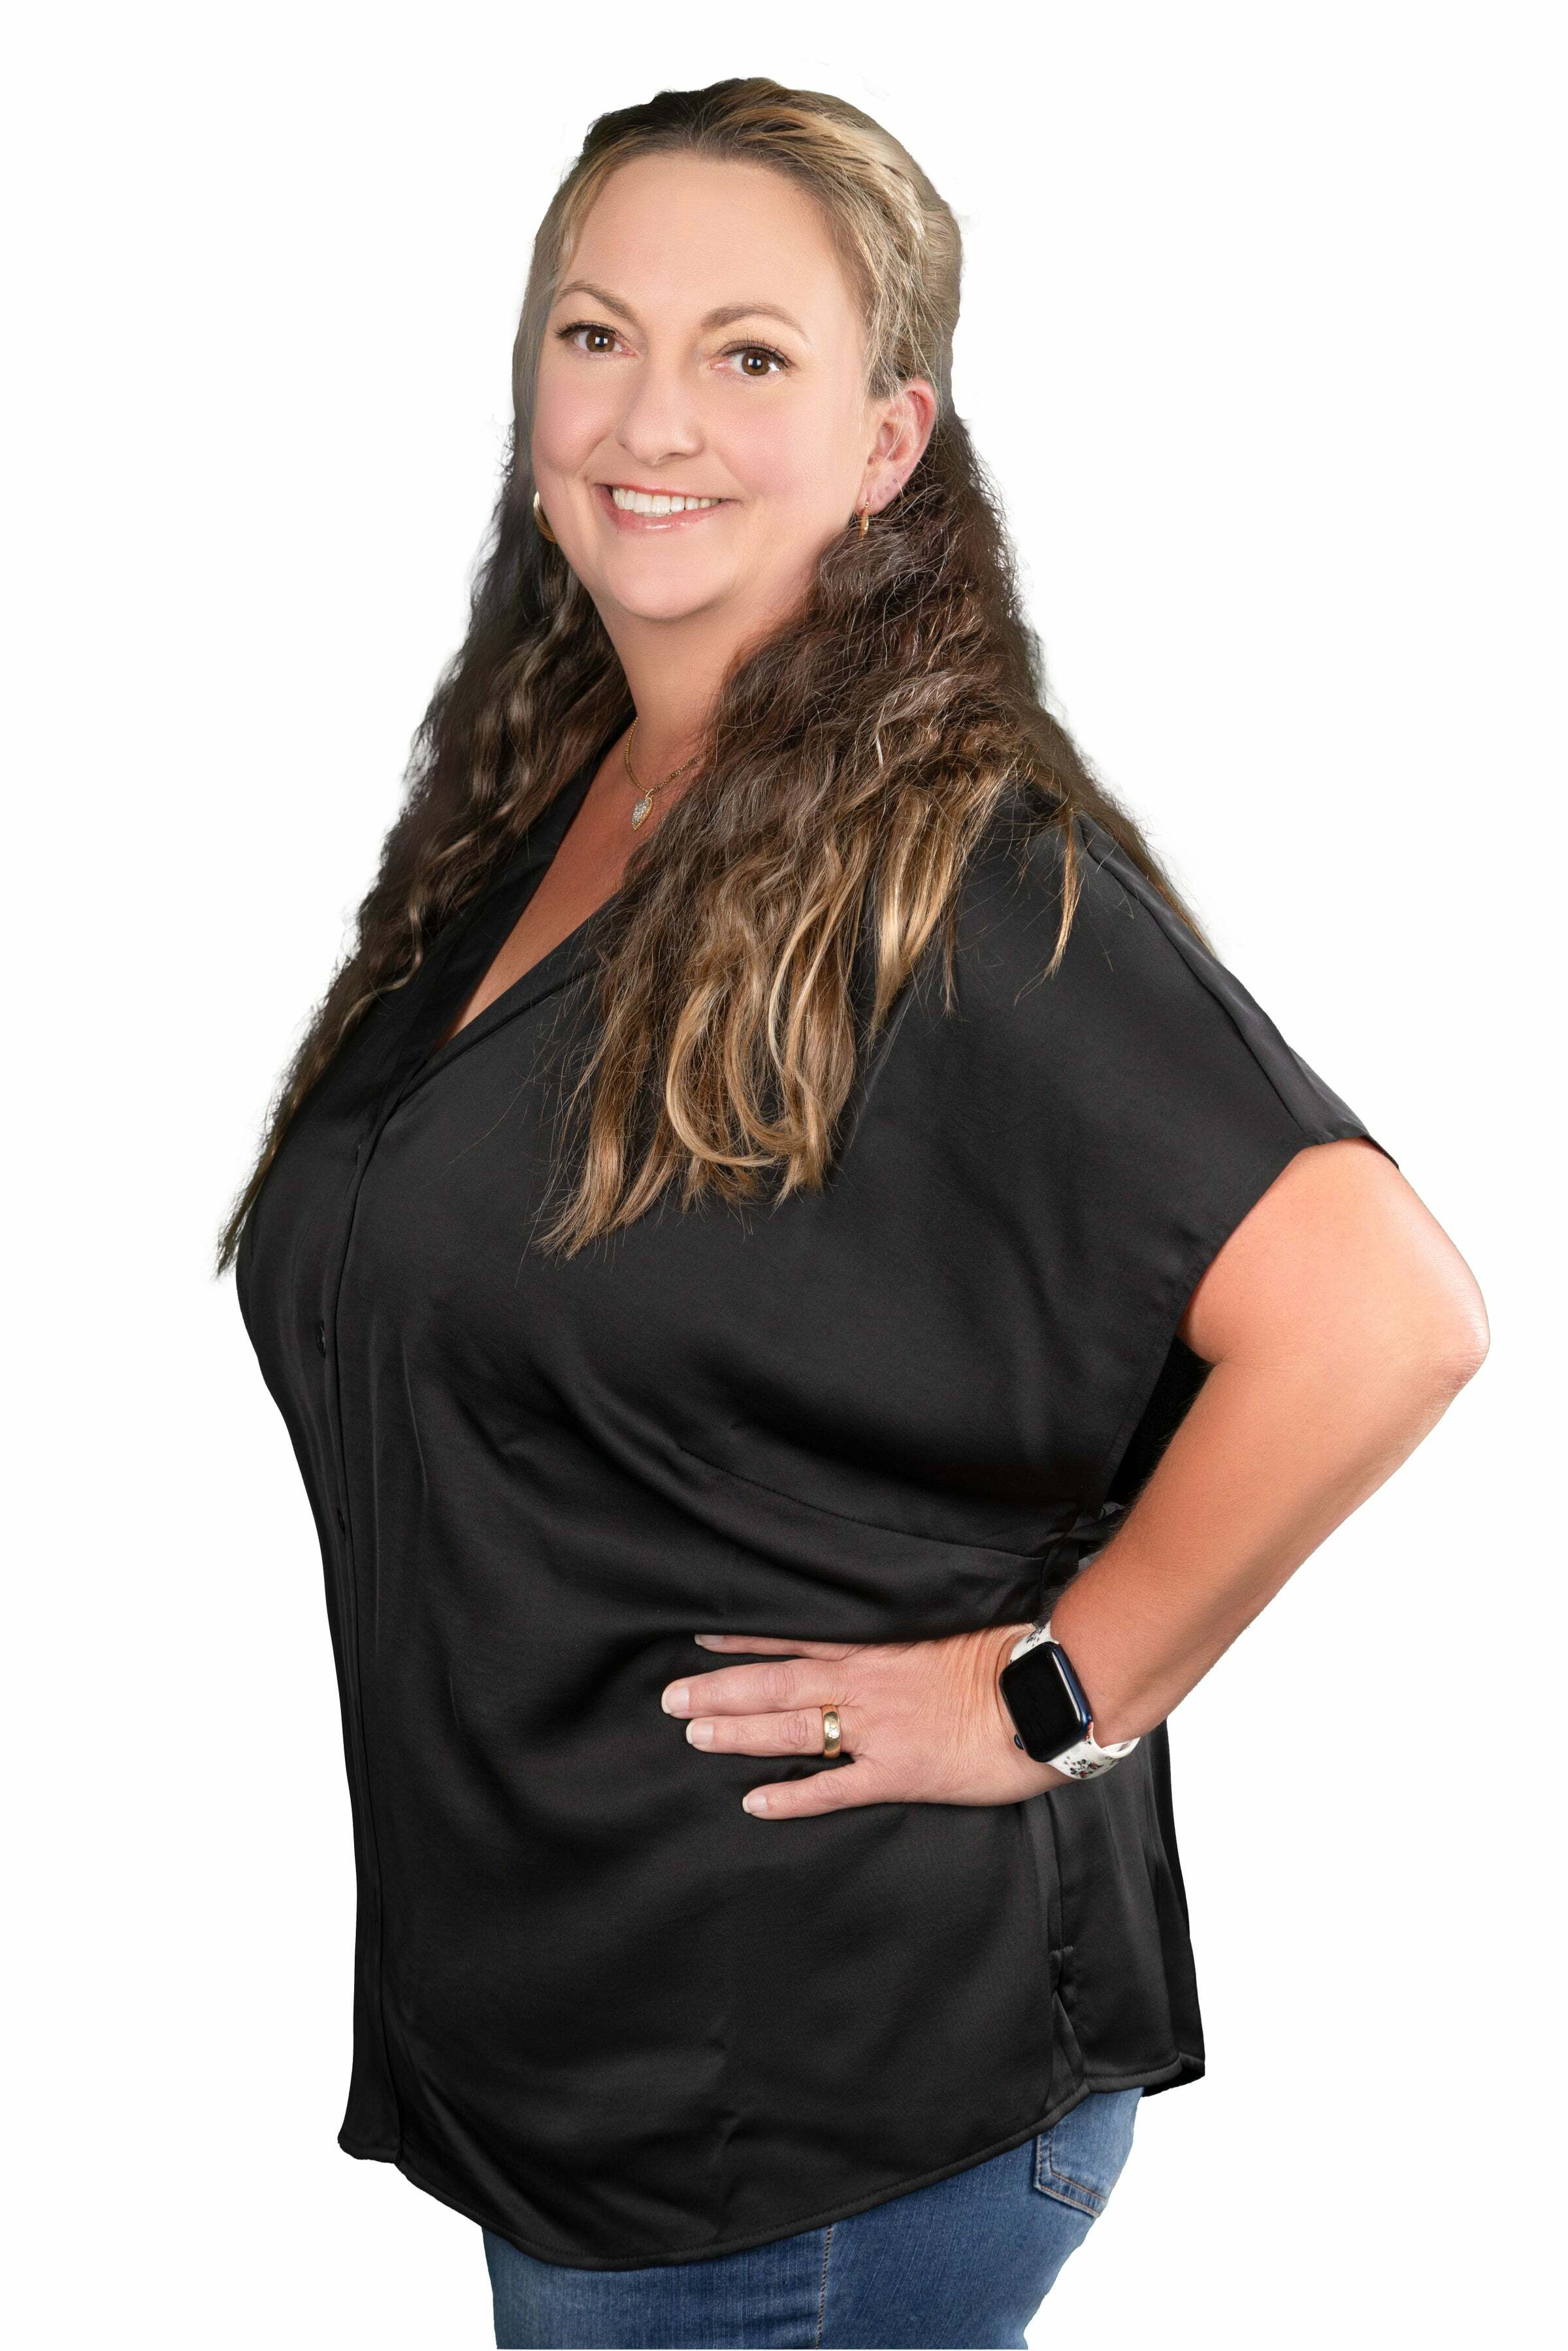 Samantha Cabadas, Real Estate Salesperson in Canyon Lake, Associated Brokers Realty